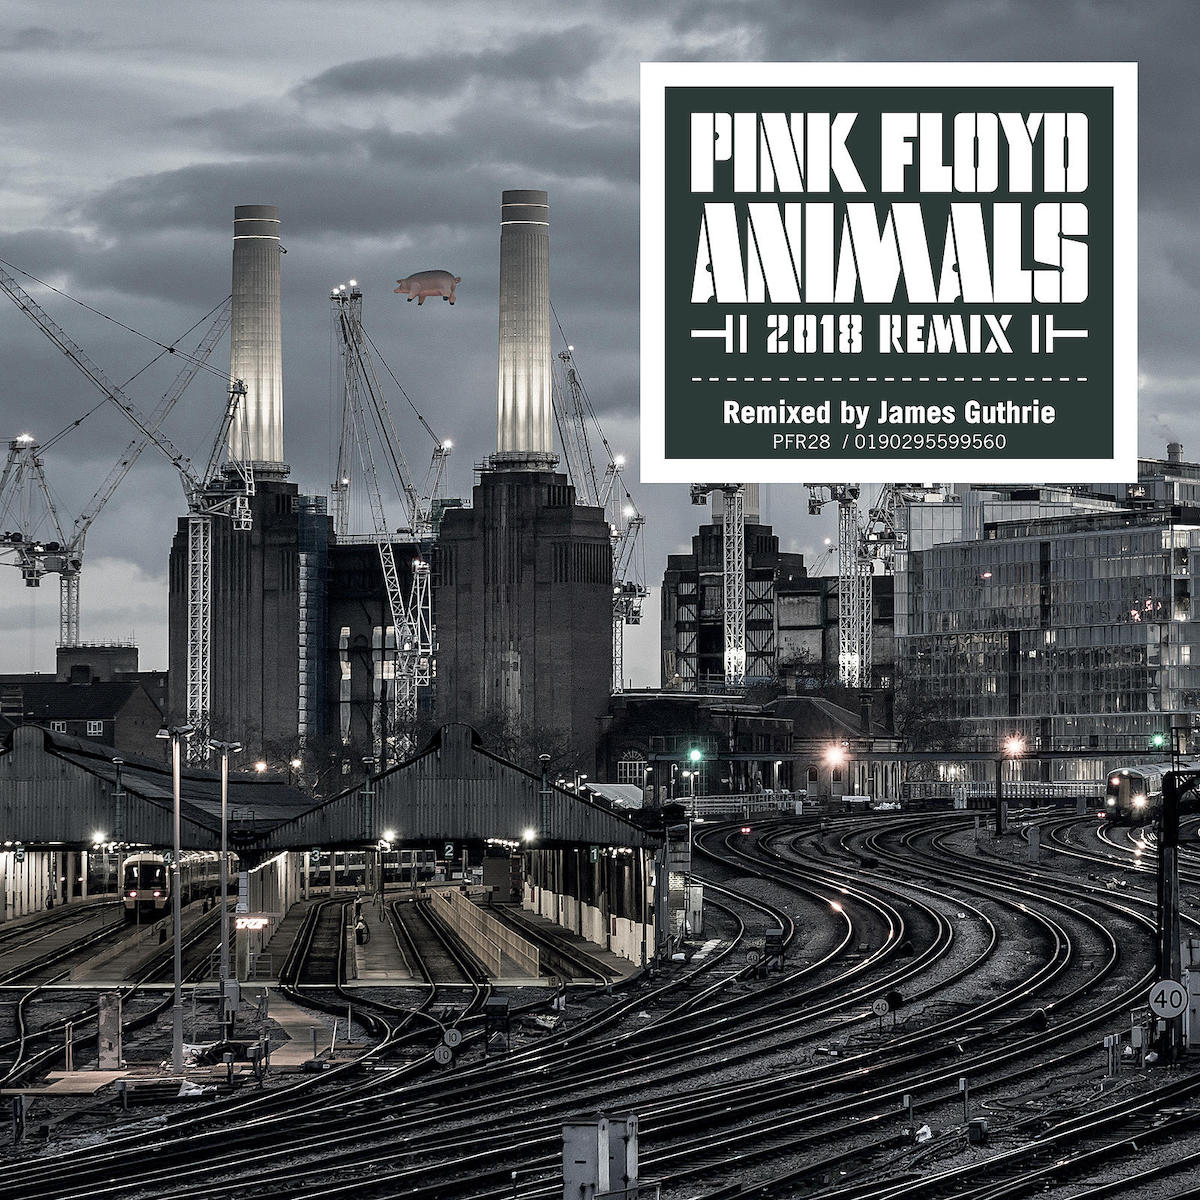 Area Resident's Album Of The Week: Pink Floyd | Animals 2018 Remix Deluxe  Edition | Tinnitist